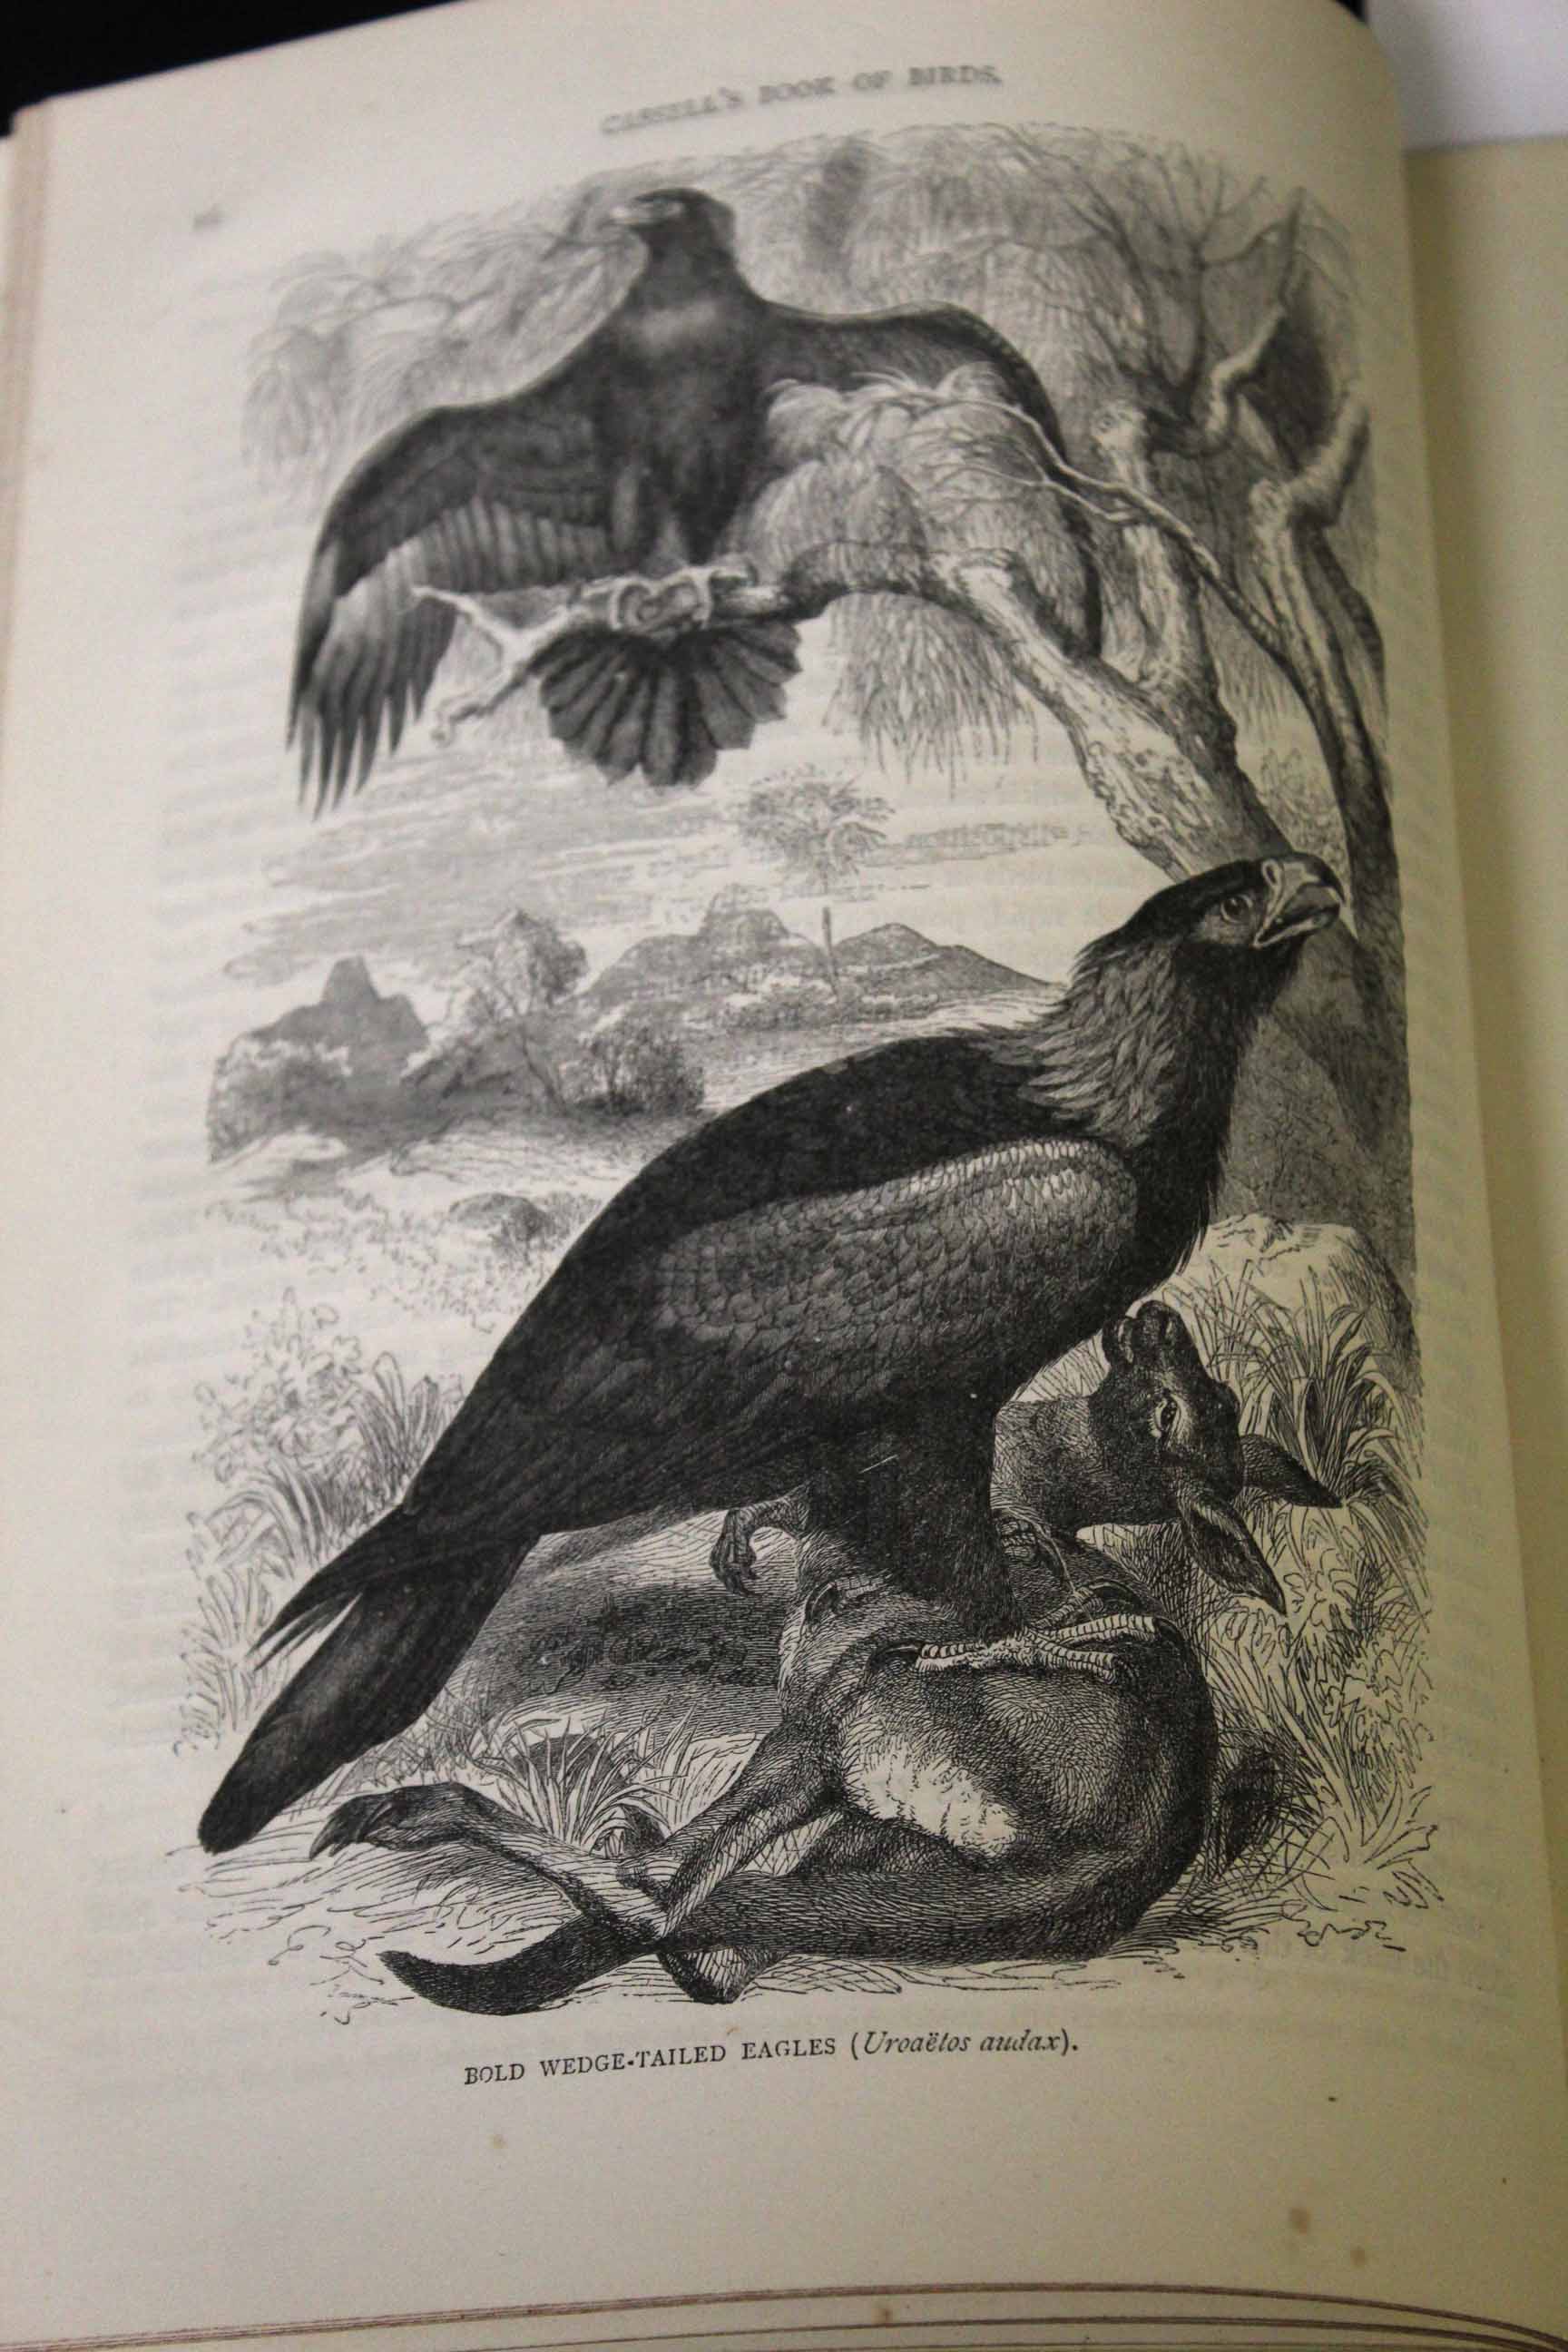 THOMAS RYMER JONES: CASSELL'S BOOK OF BIRDS FROM THE TEXT OF DR BREHM, London, Cassell Petter & - Image 2 of 3